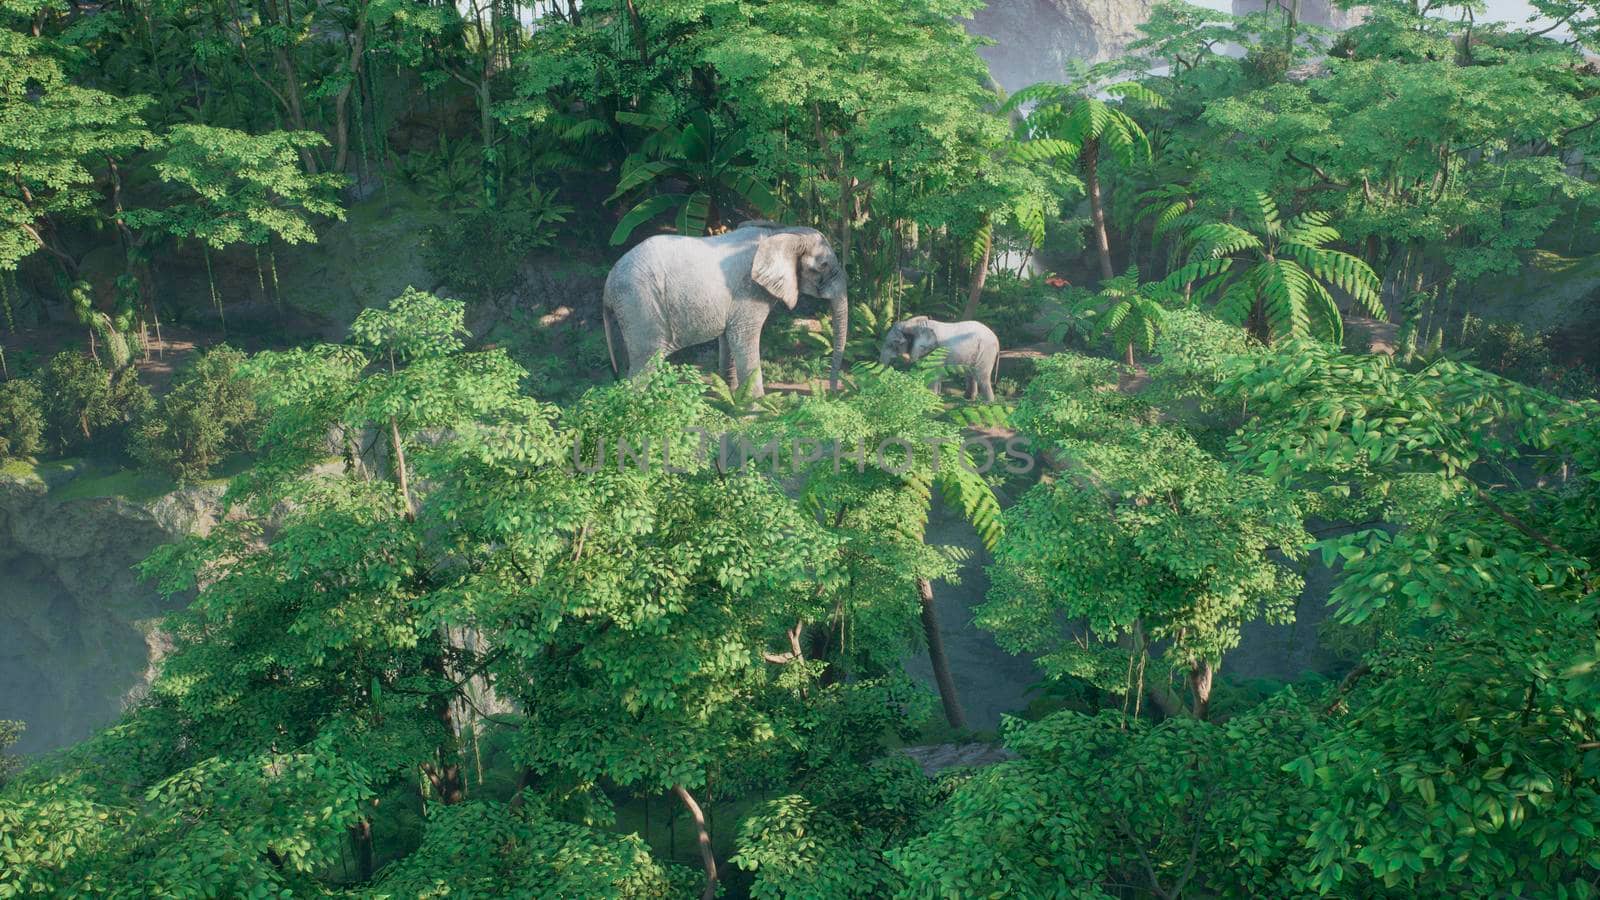 An African elephant with a baby elephant is eat plants in the green jungle. A look at the African jungle.